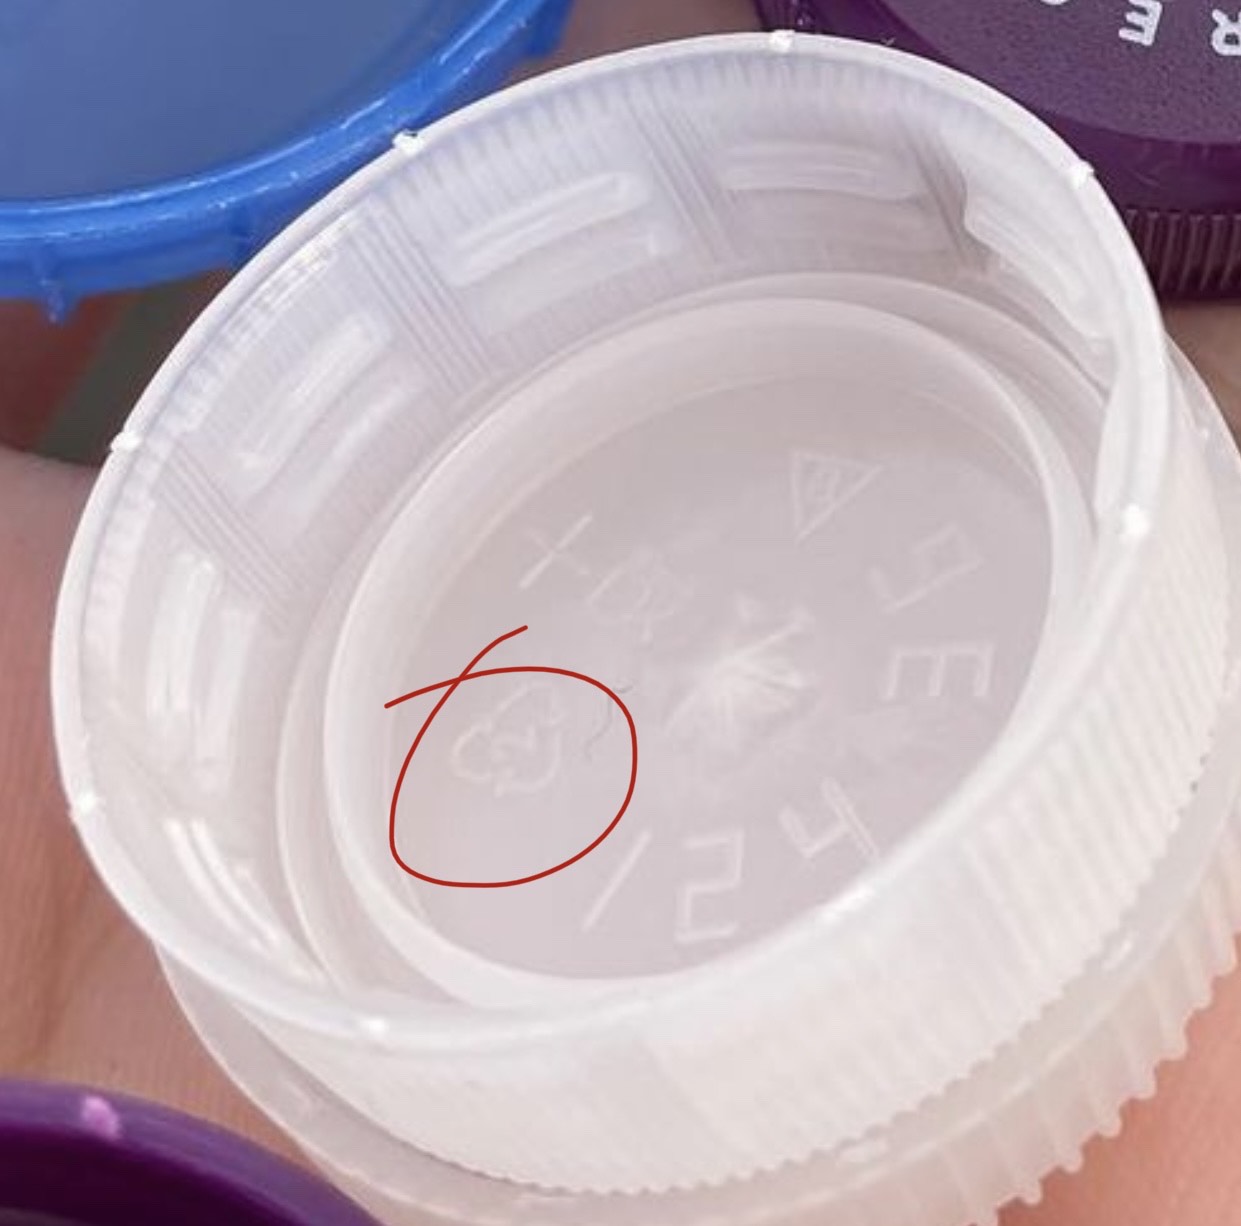 Recycling info circled on bottle top